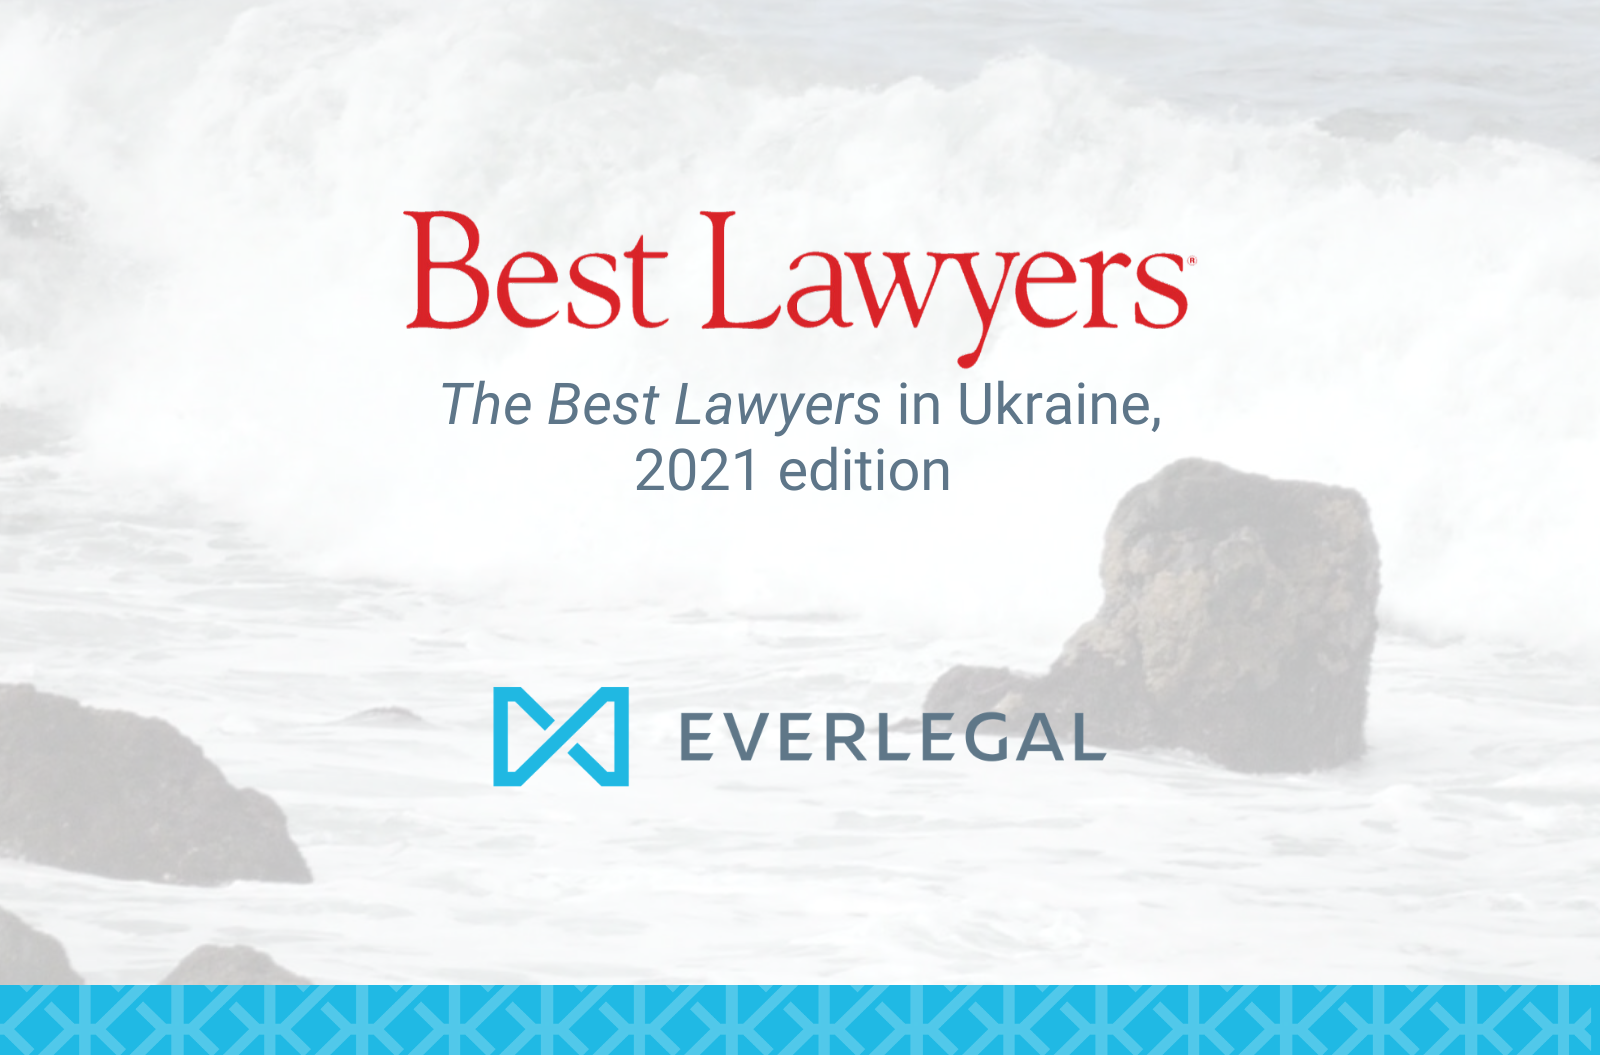 EVERLEGAL partners are recommended by The Best Lawyers 2021 in Ukraine